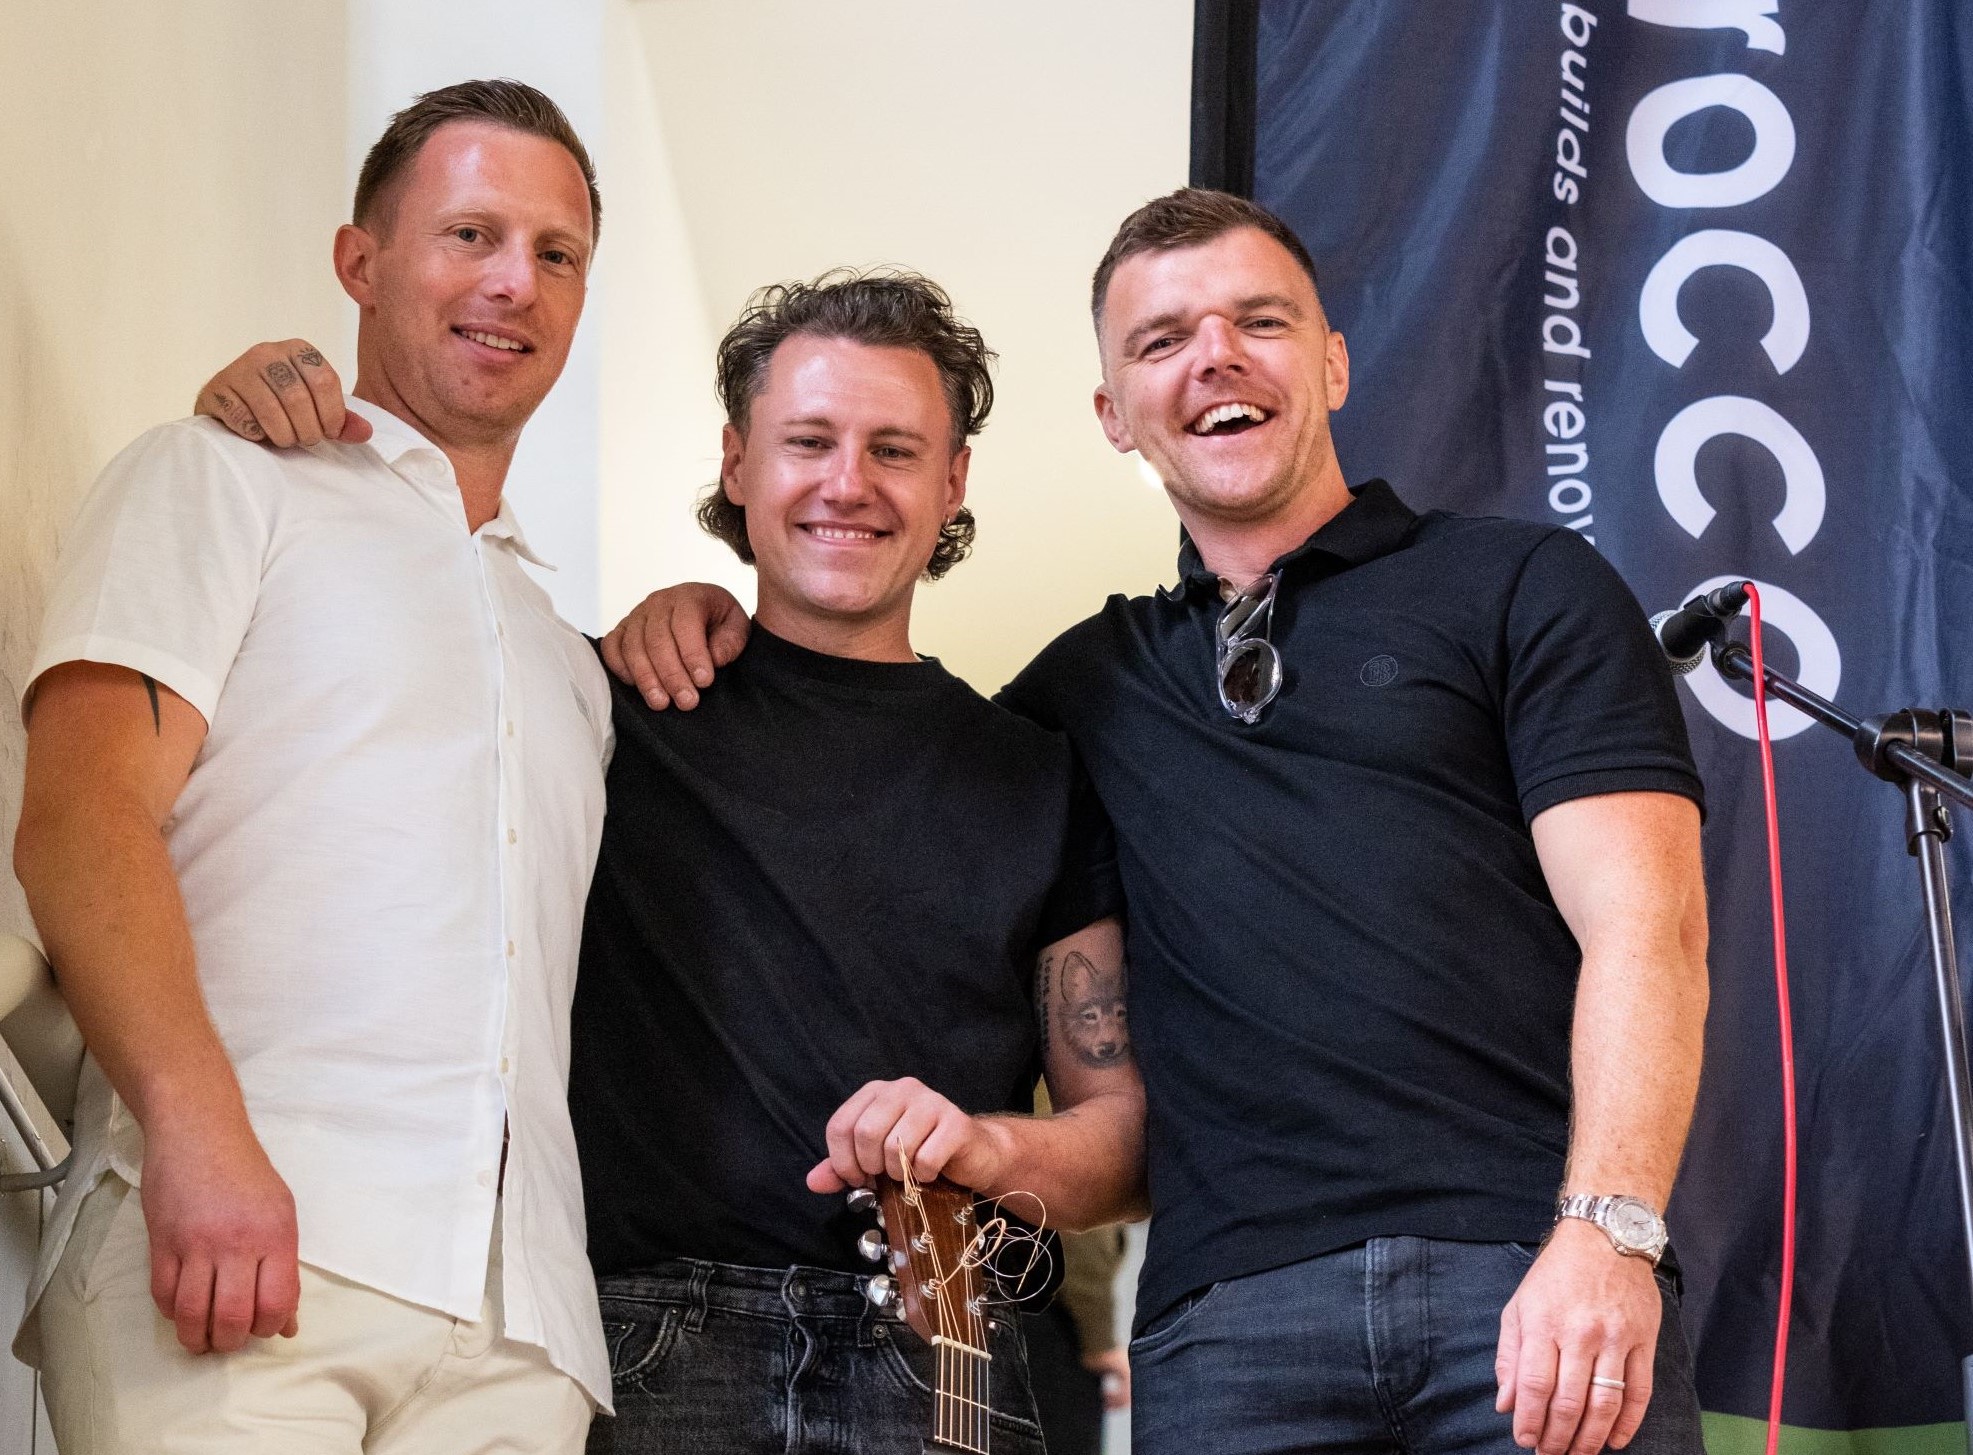 Callum Beattie officially opens Orocco HQ with exclusive concert